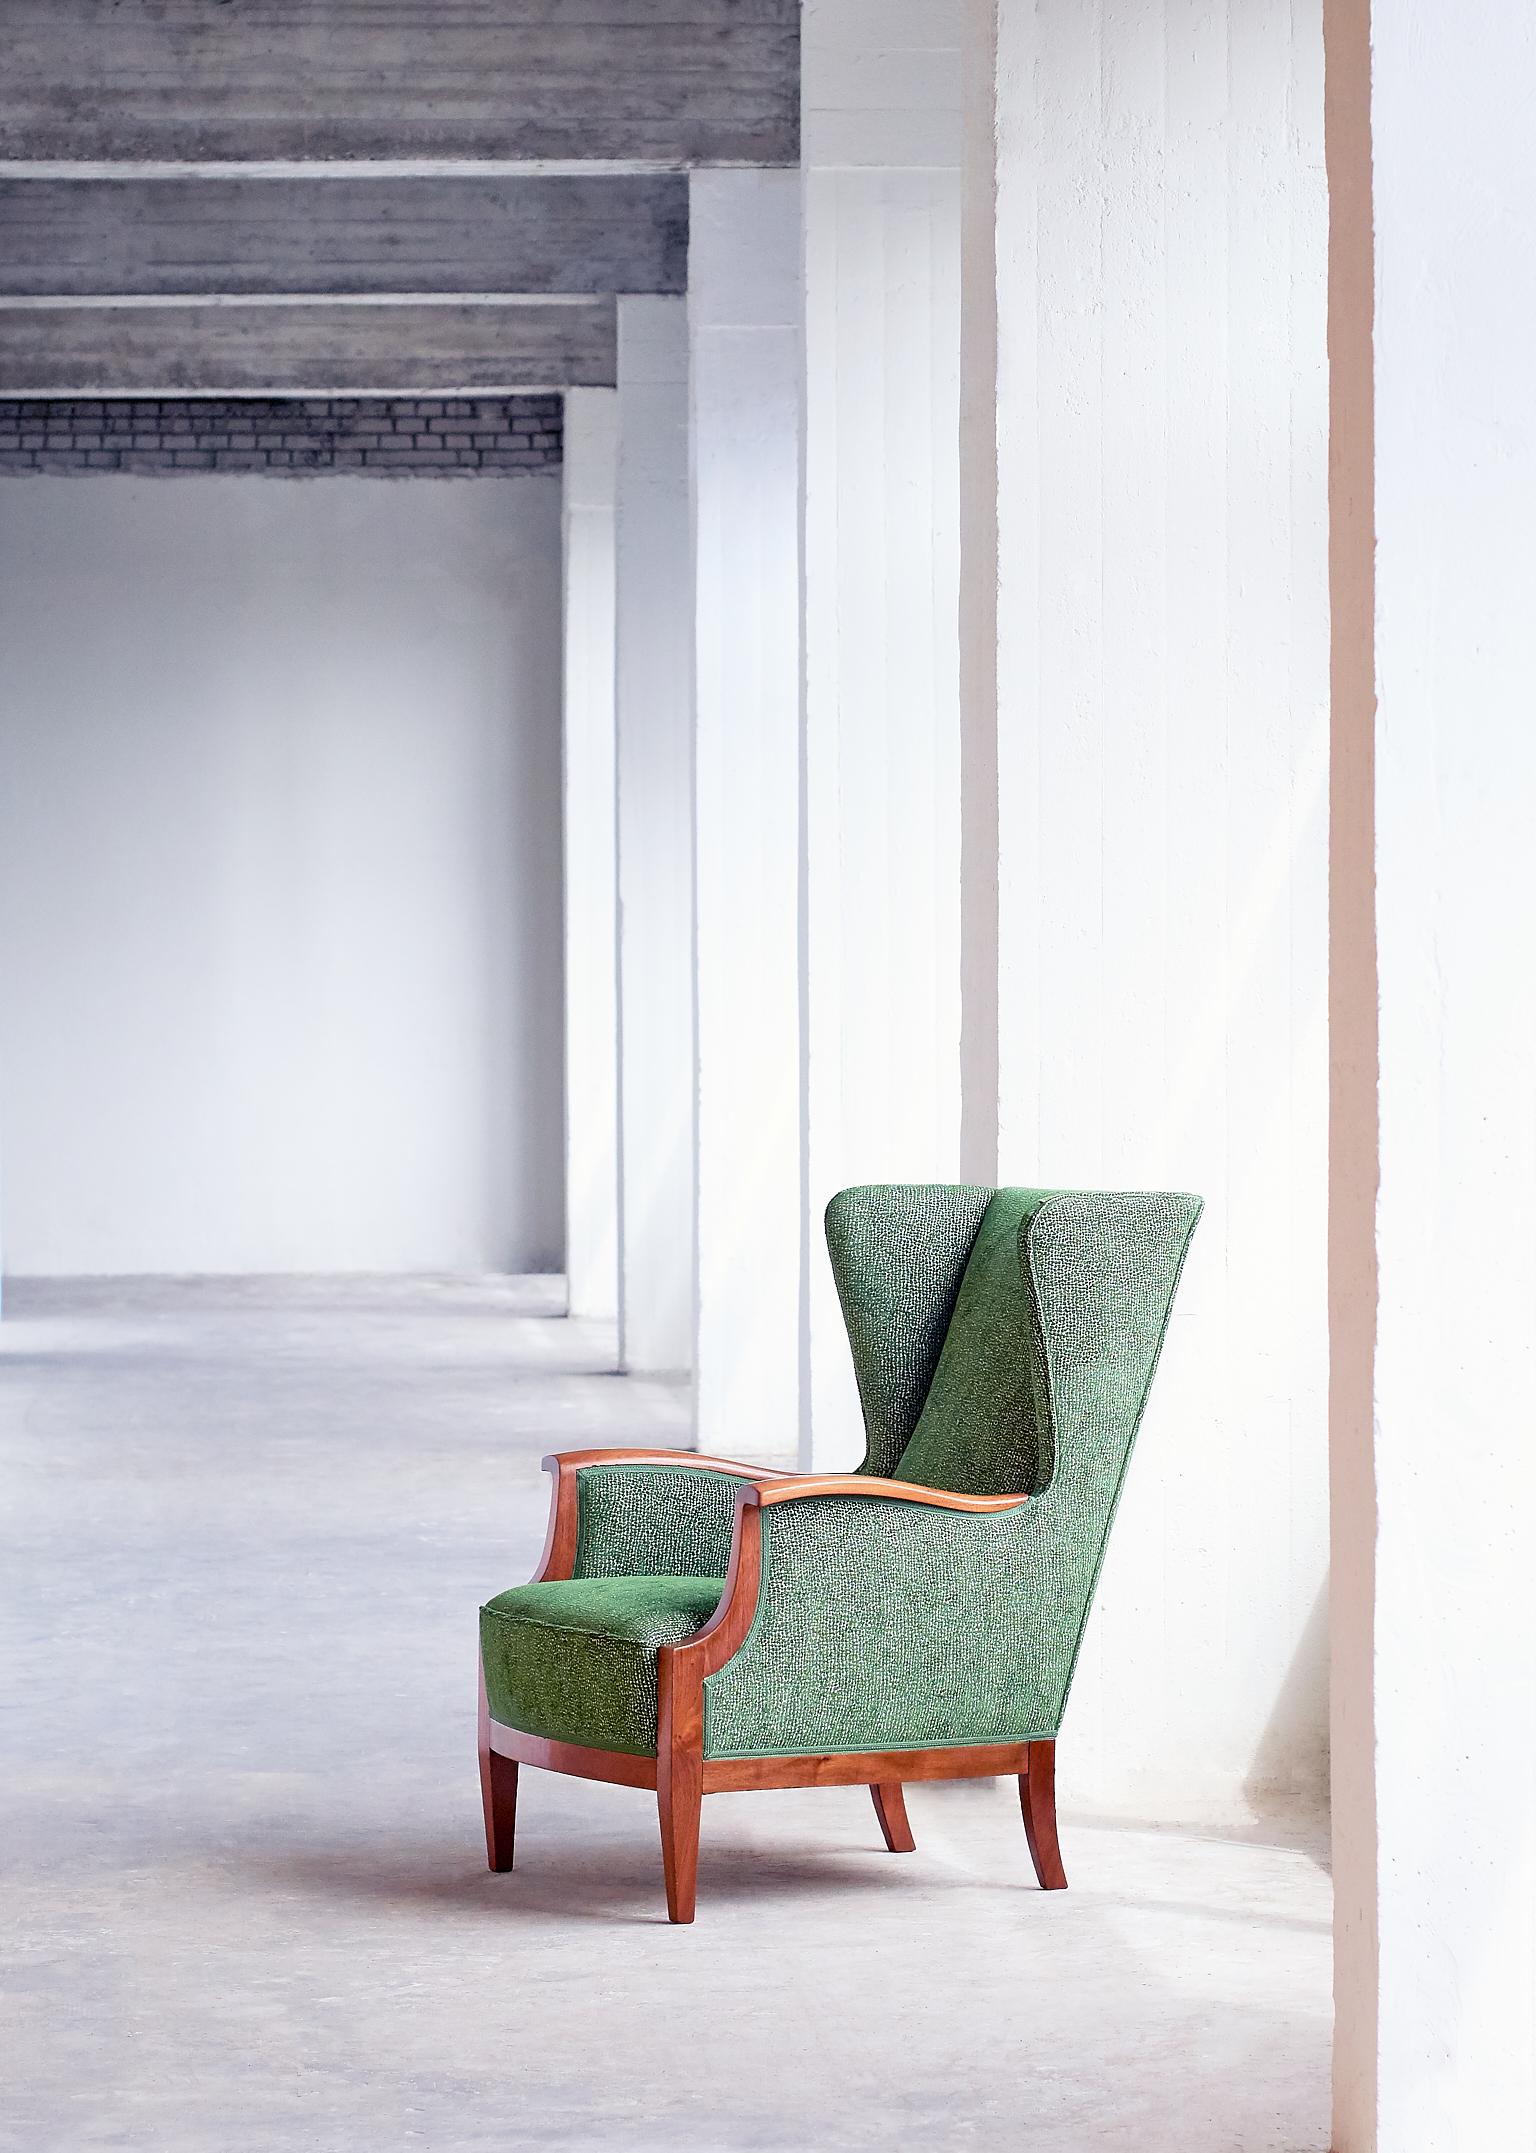 This rare wingback chair was designed and made by Danish cabinetmaker Frits Henningsen in the mid-1930s. The particular model was exhibited at the 1933 exhibition held at the Industriforneningen in Copenhagen.
A striking example of Henningsen's